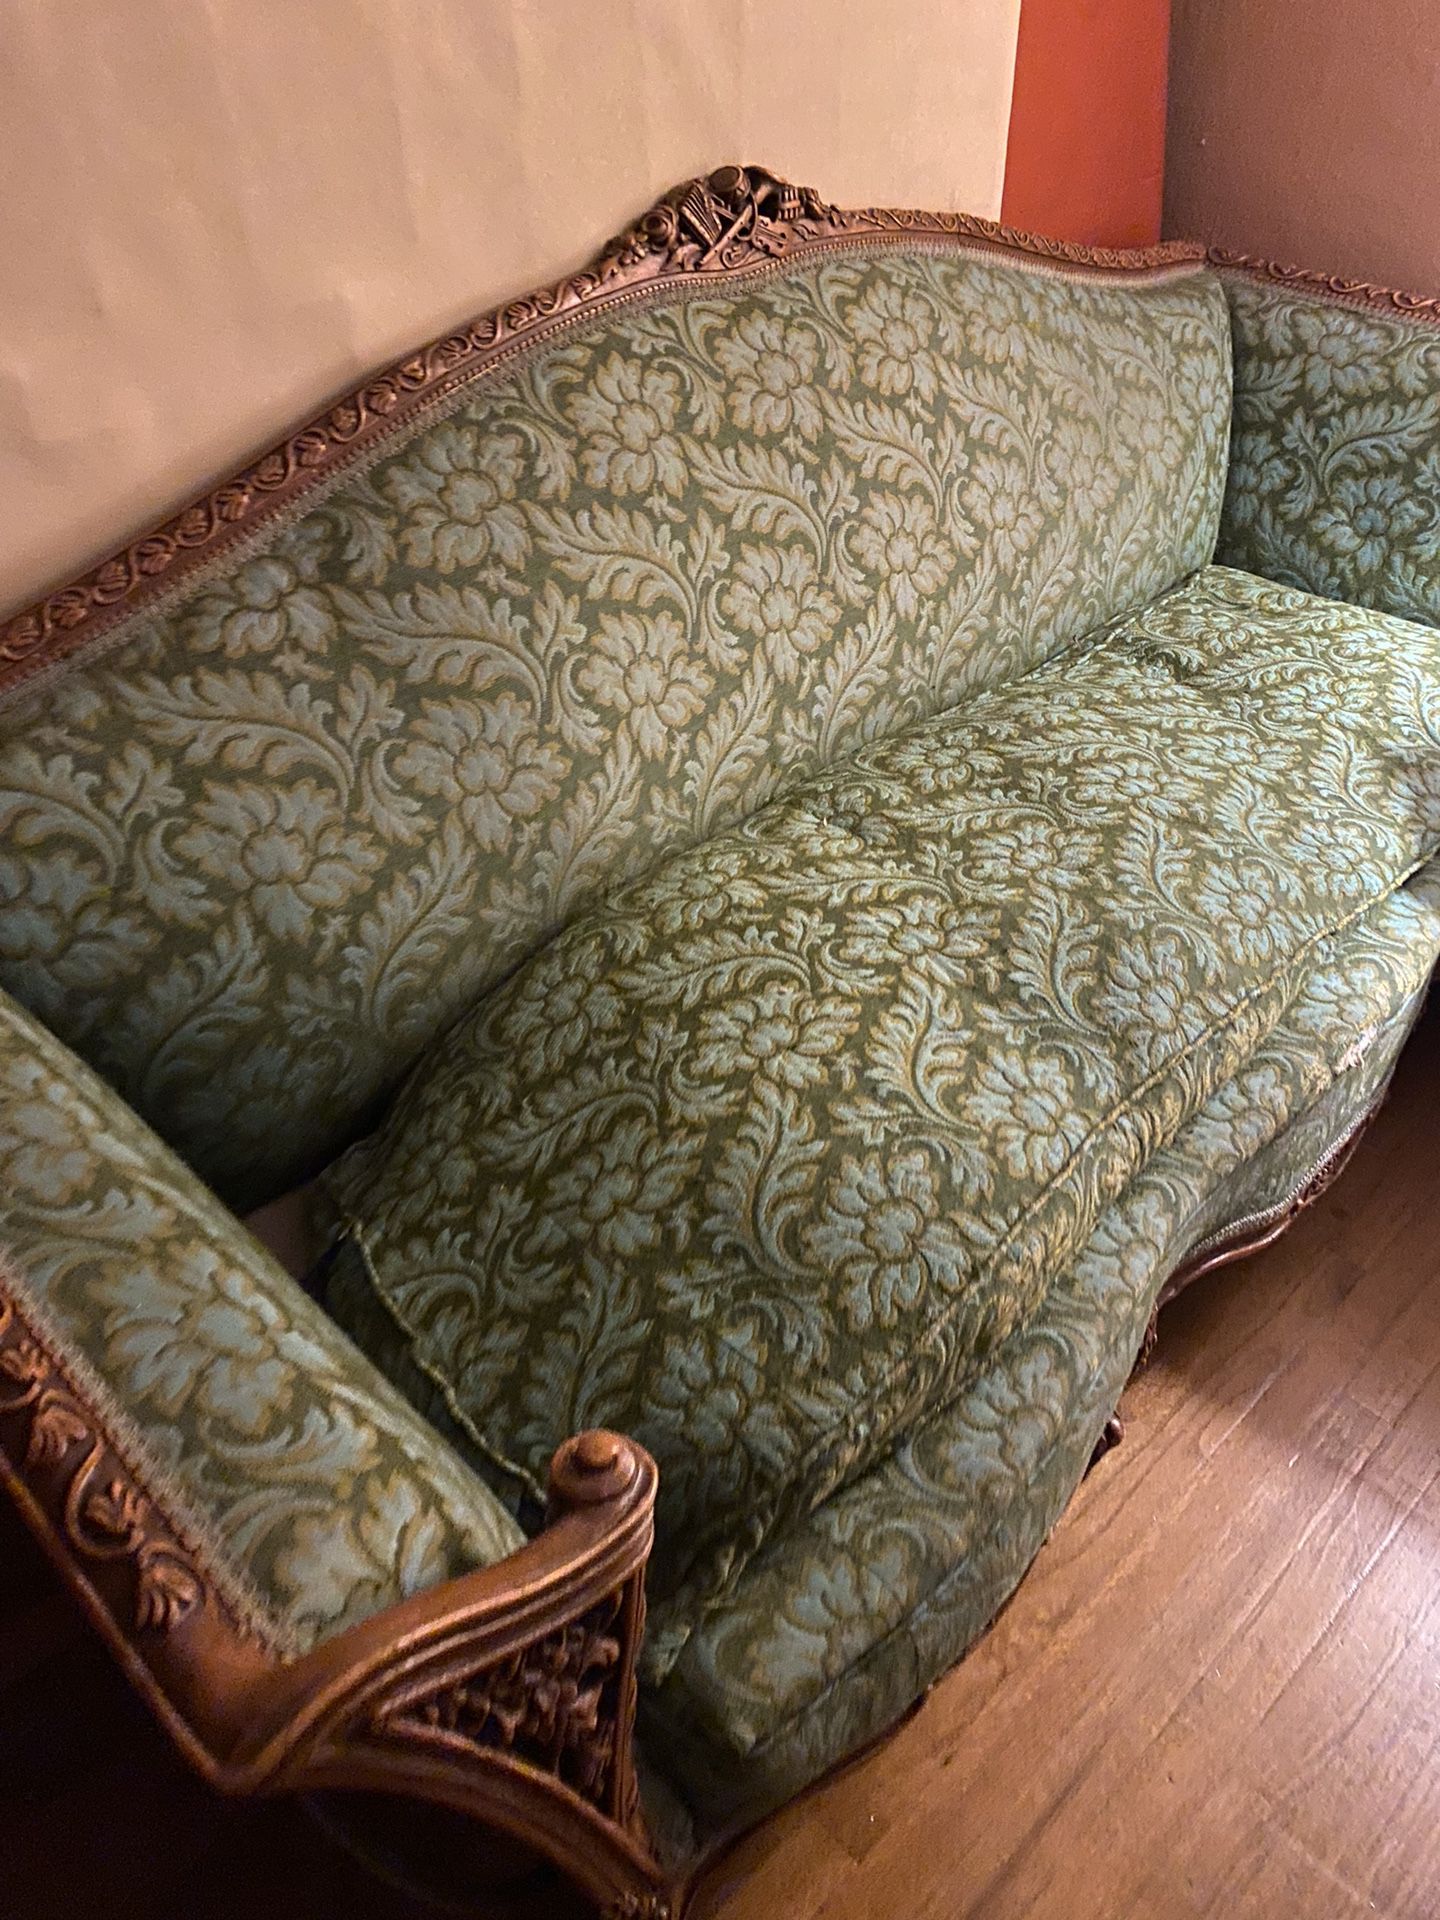 Antique Couch From France